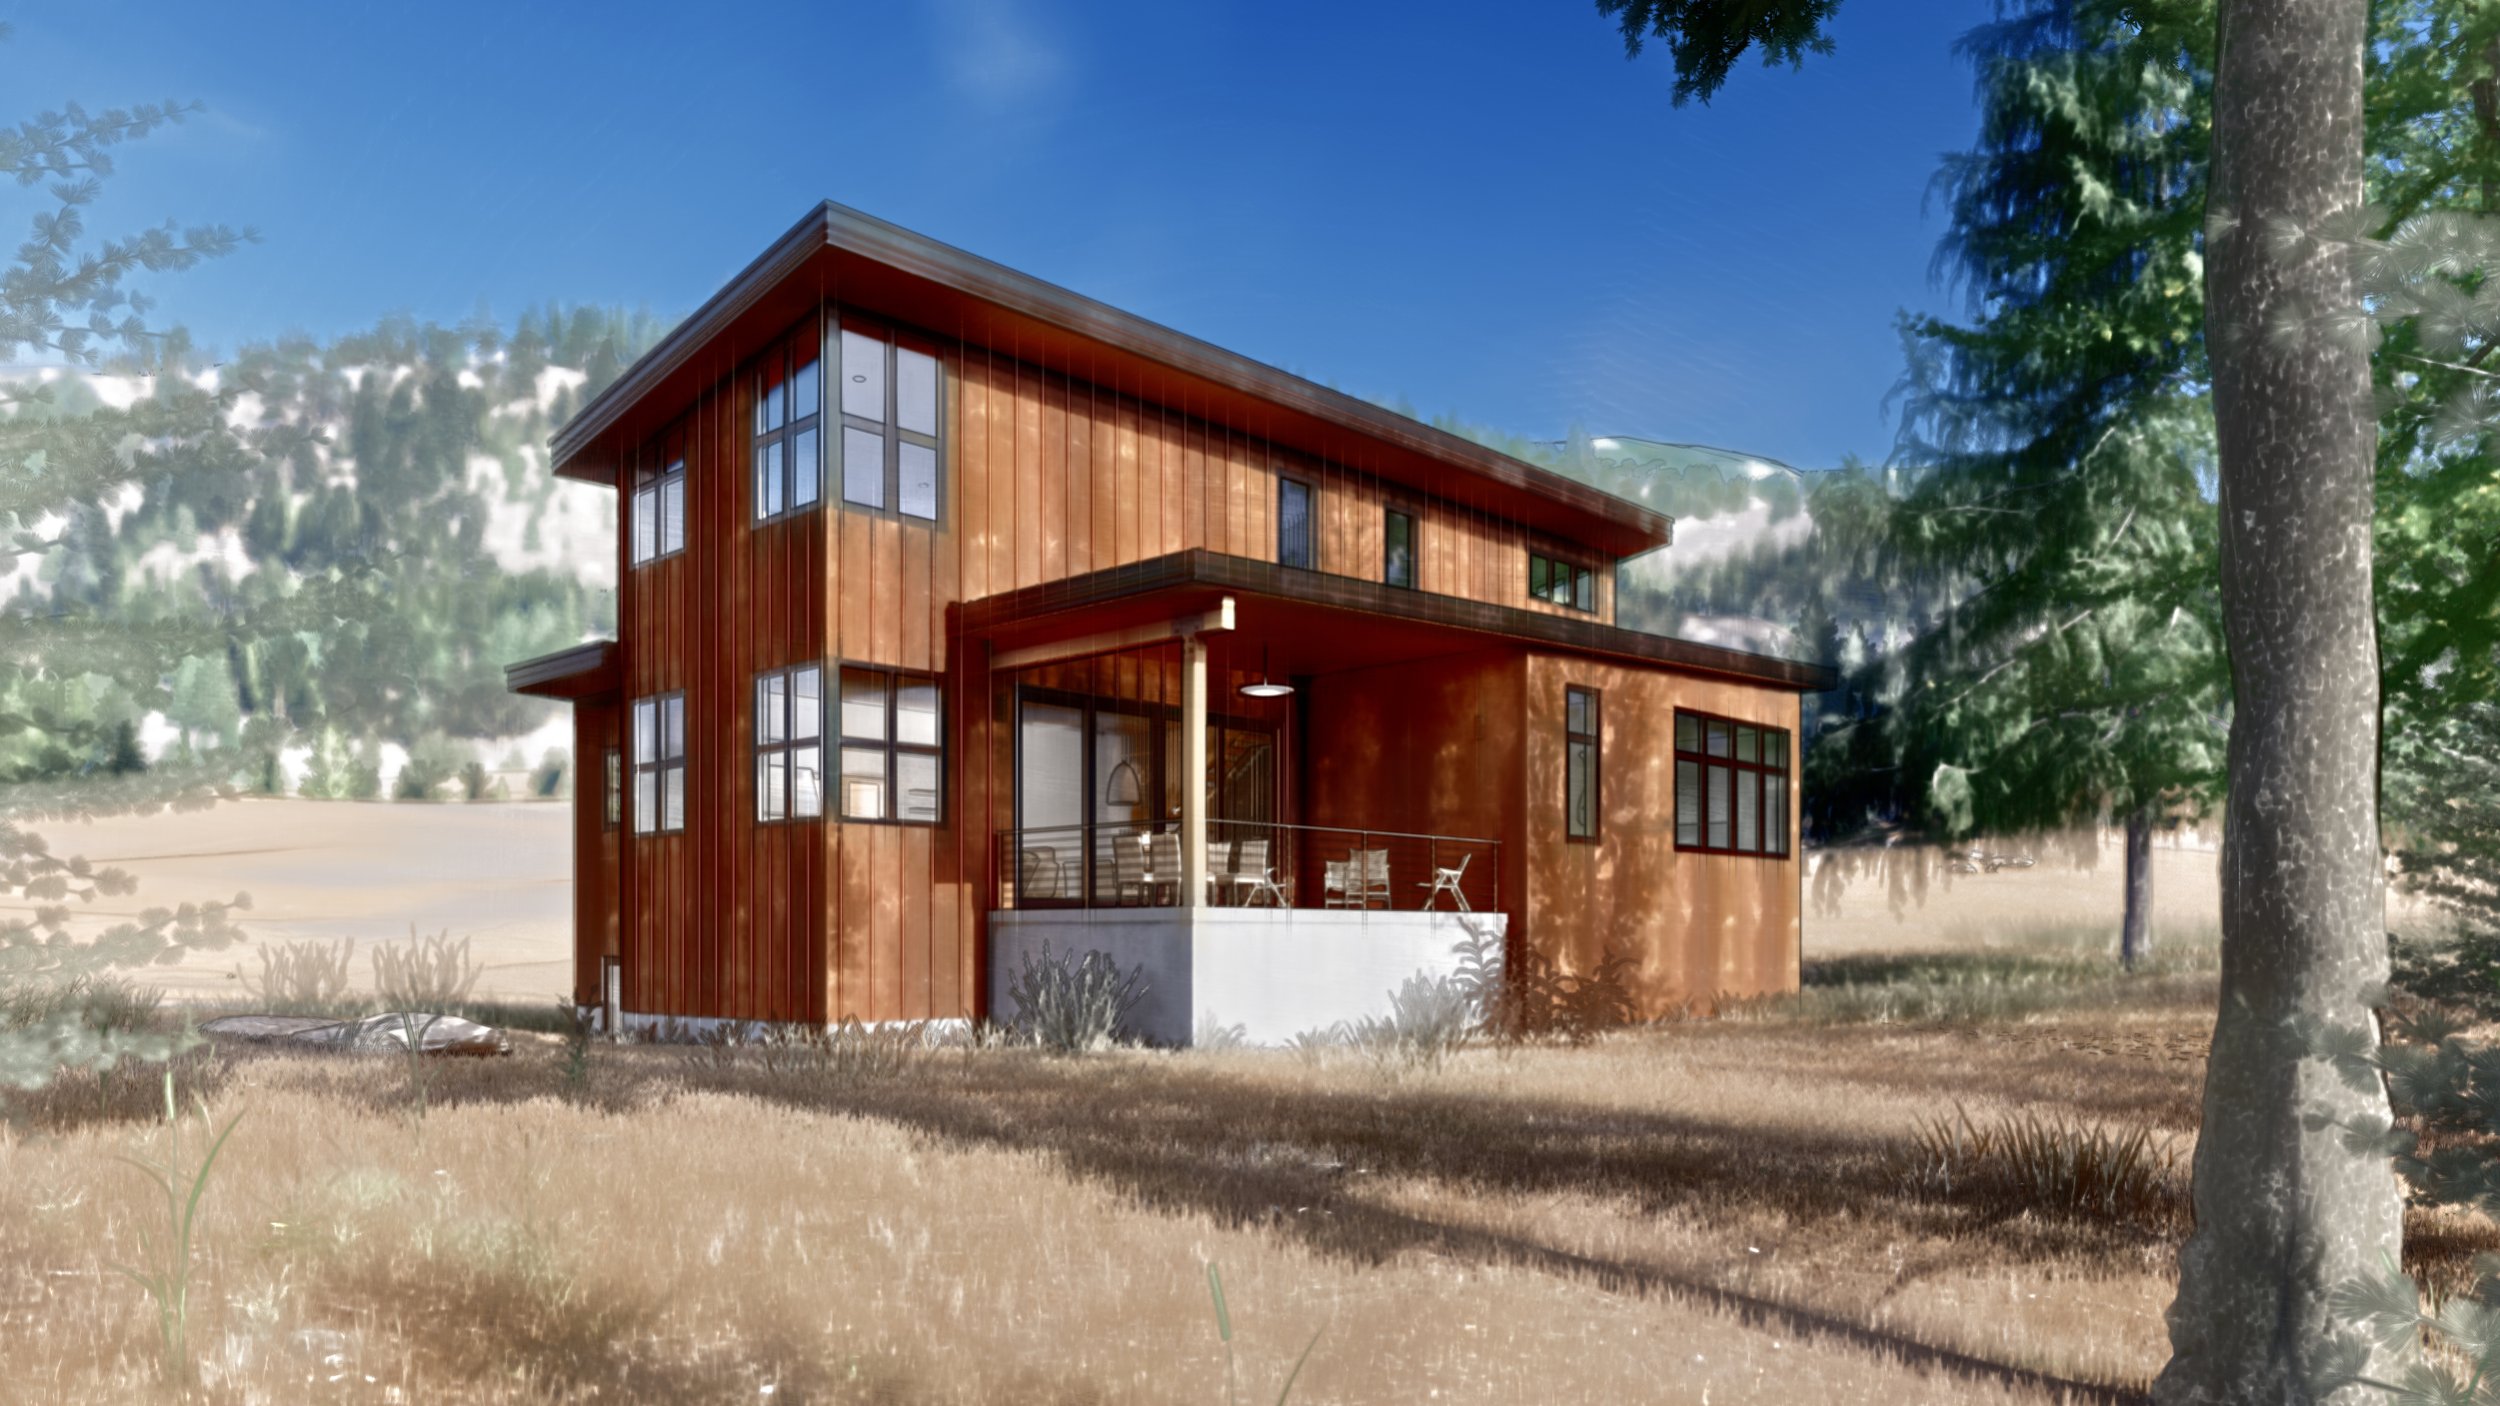  The design incorporates high-performance windows, a ground-source heat pump, and solar panels. Plus, efforts are made to minimize the use of foam insulation. 